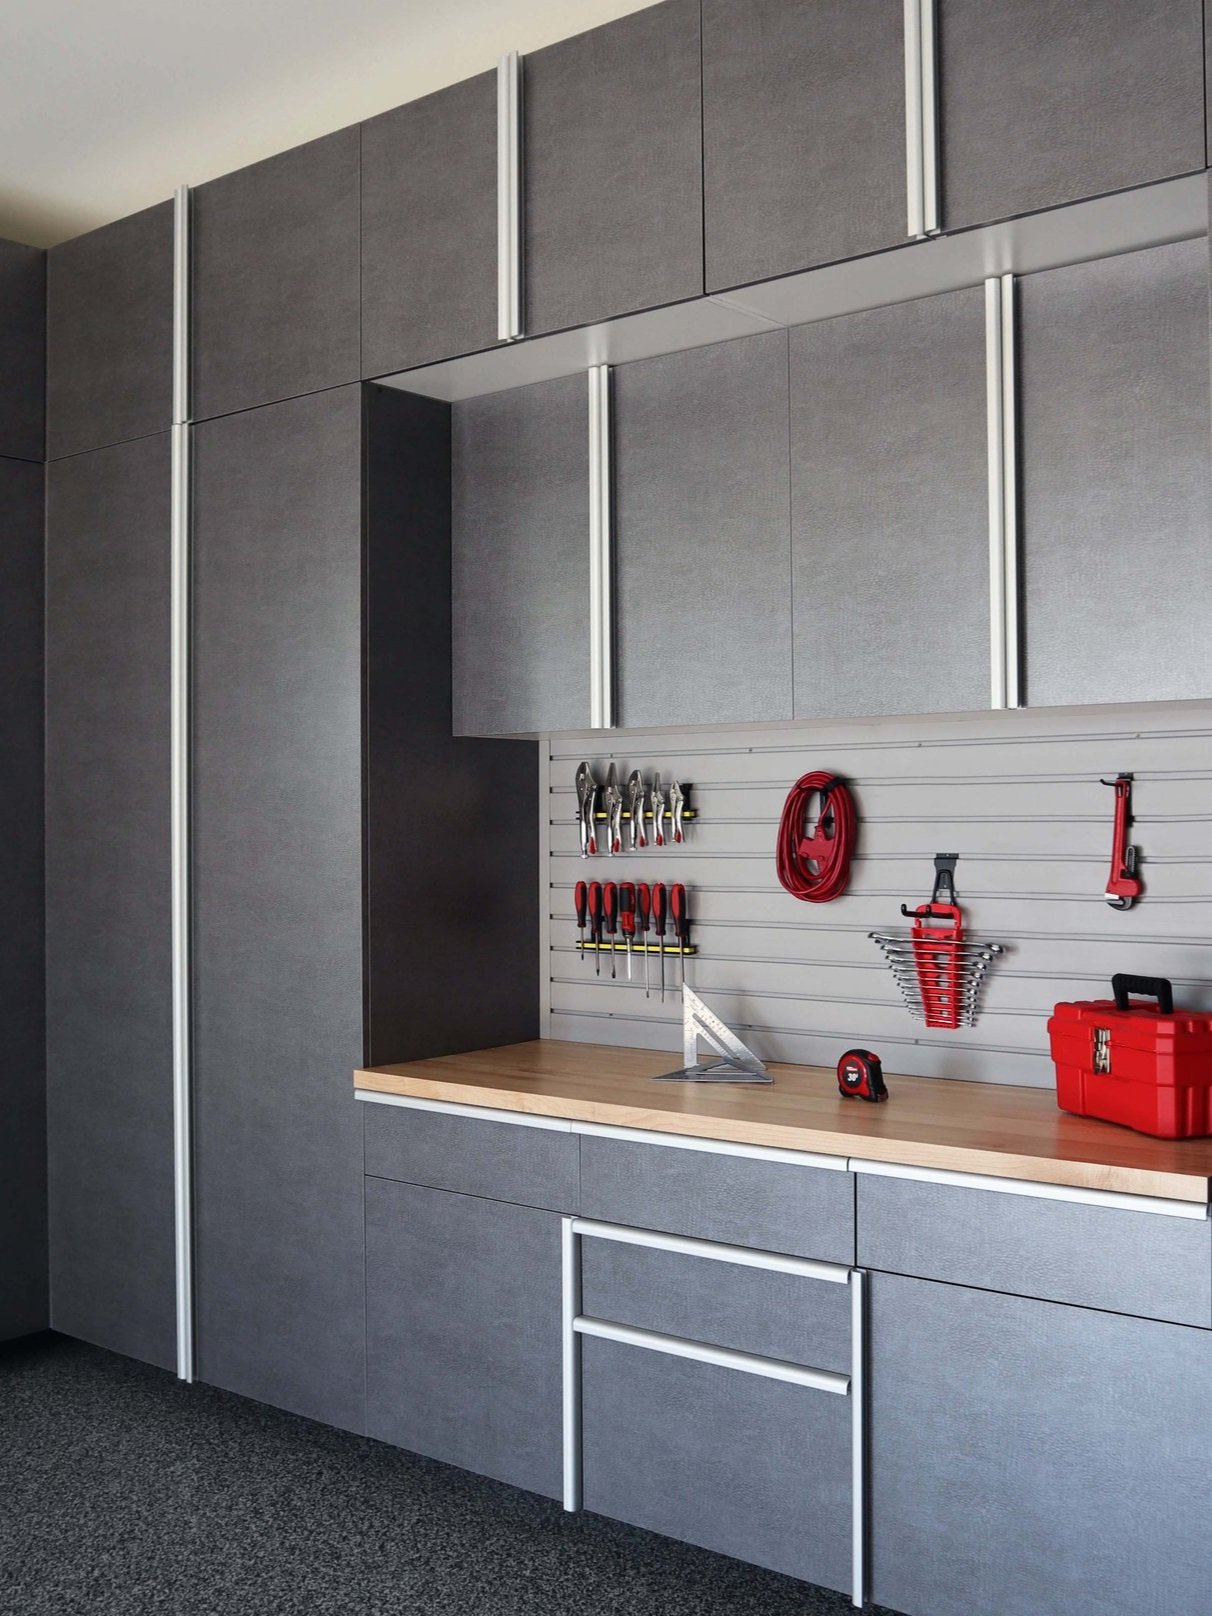 Pewter+Cabinets+with+Butcher+Block+Countertop+and+Grey+Slatwall+Closeup+Angle+June+2021.jpg